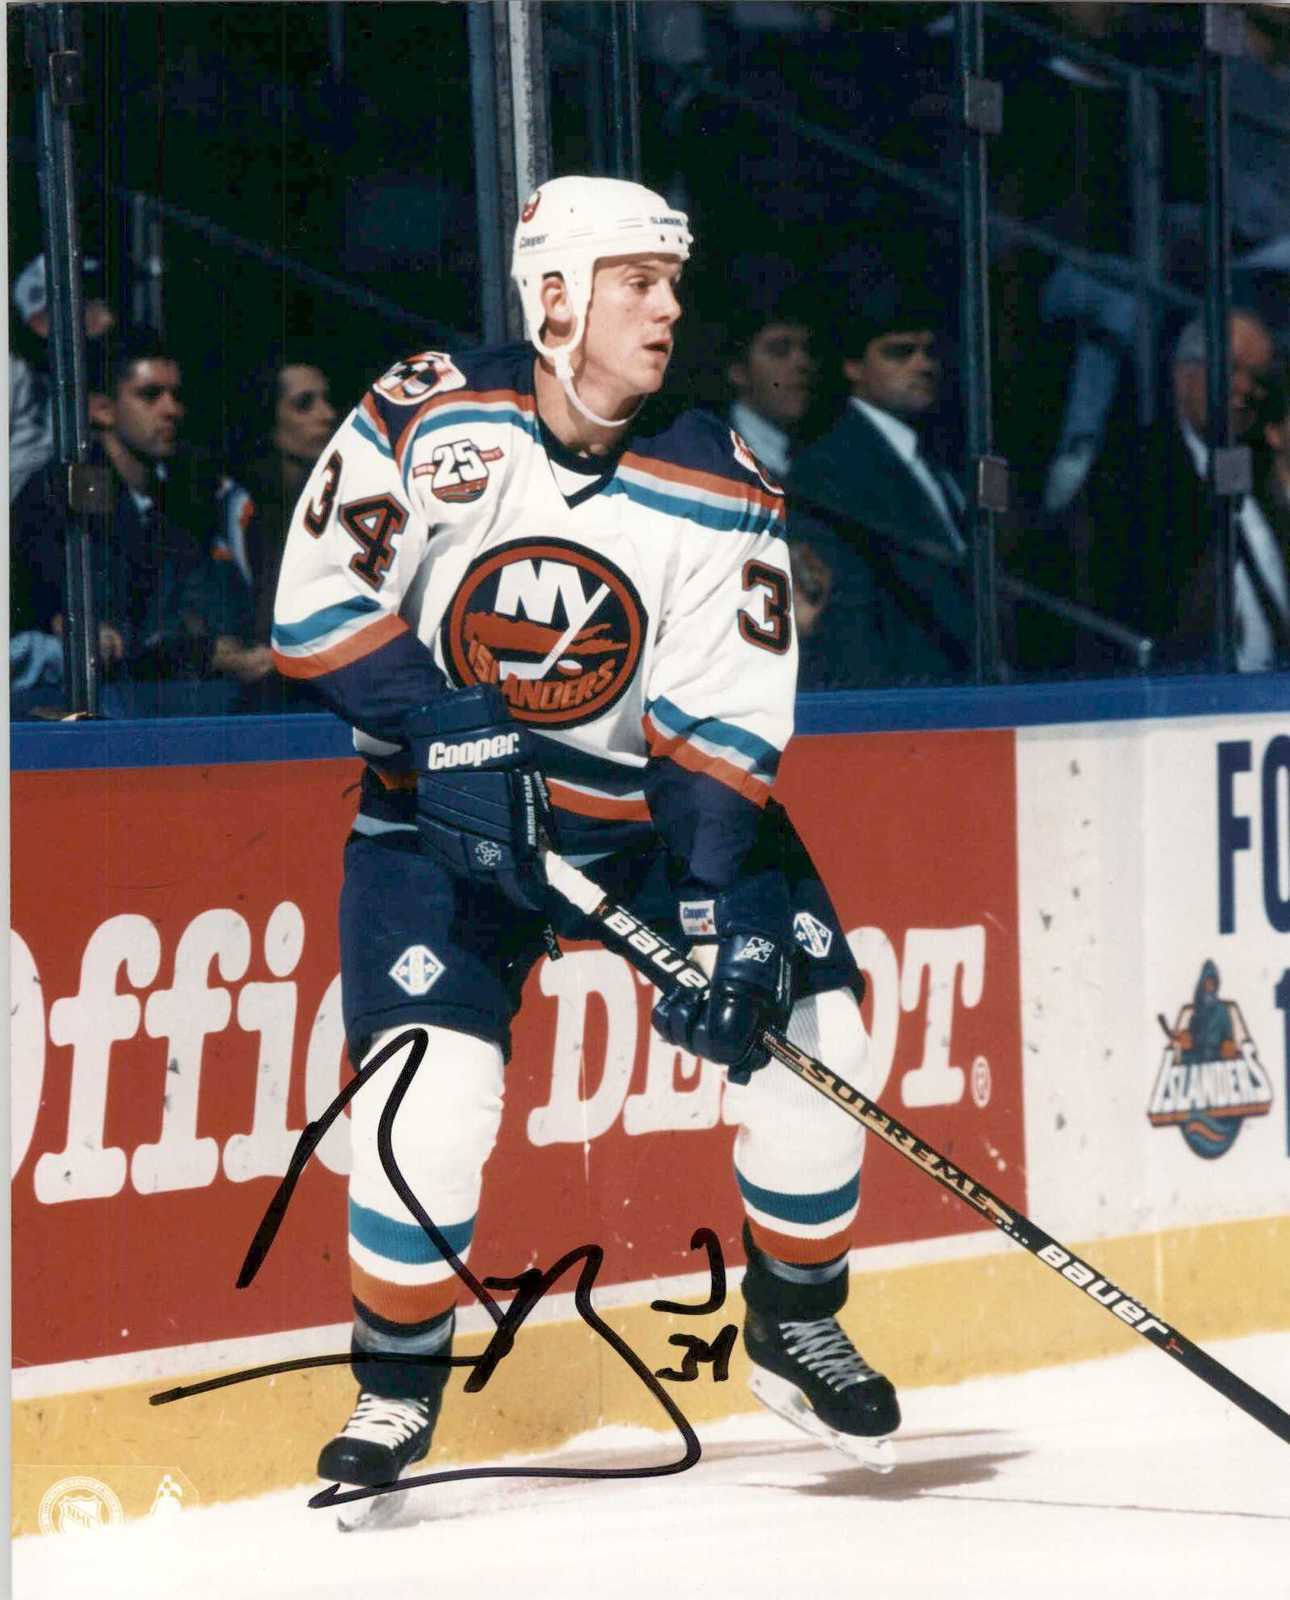 Primary image for Bryan Berard Signed Autographed Glossy 8x10 Photo - New York Islanders